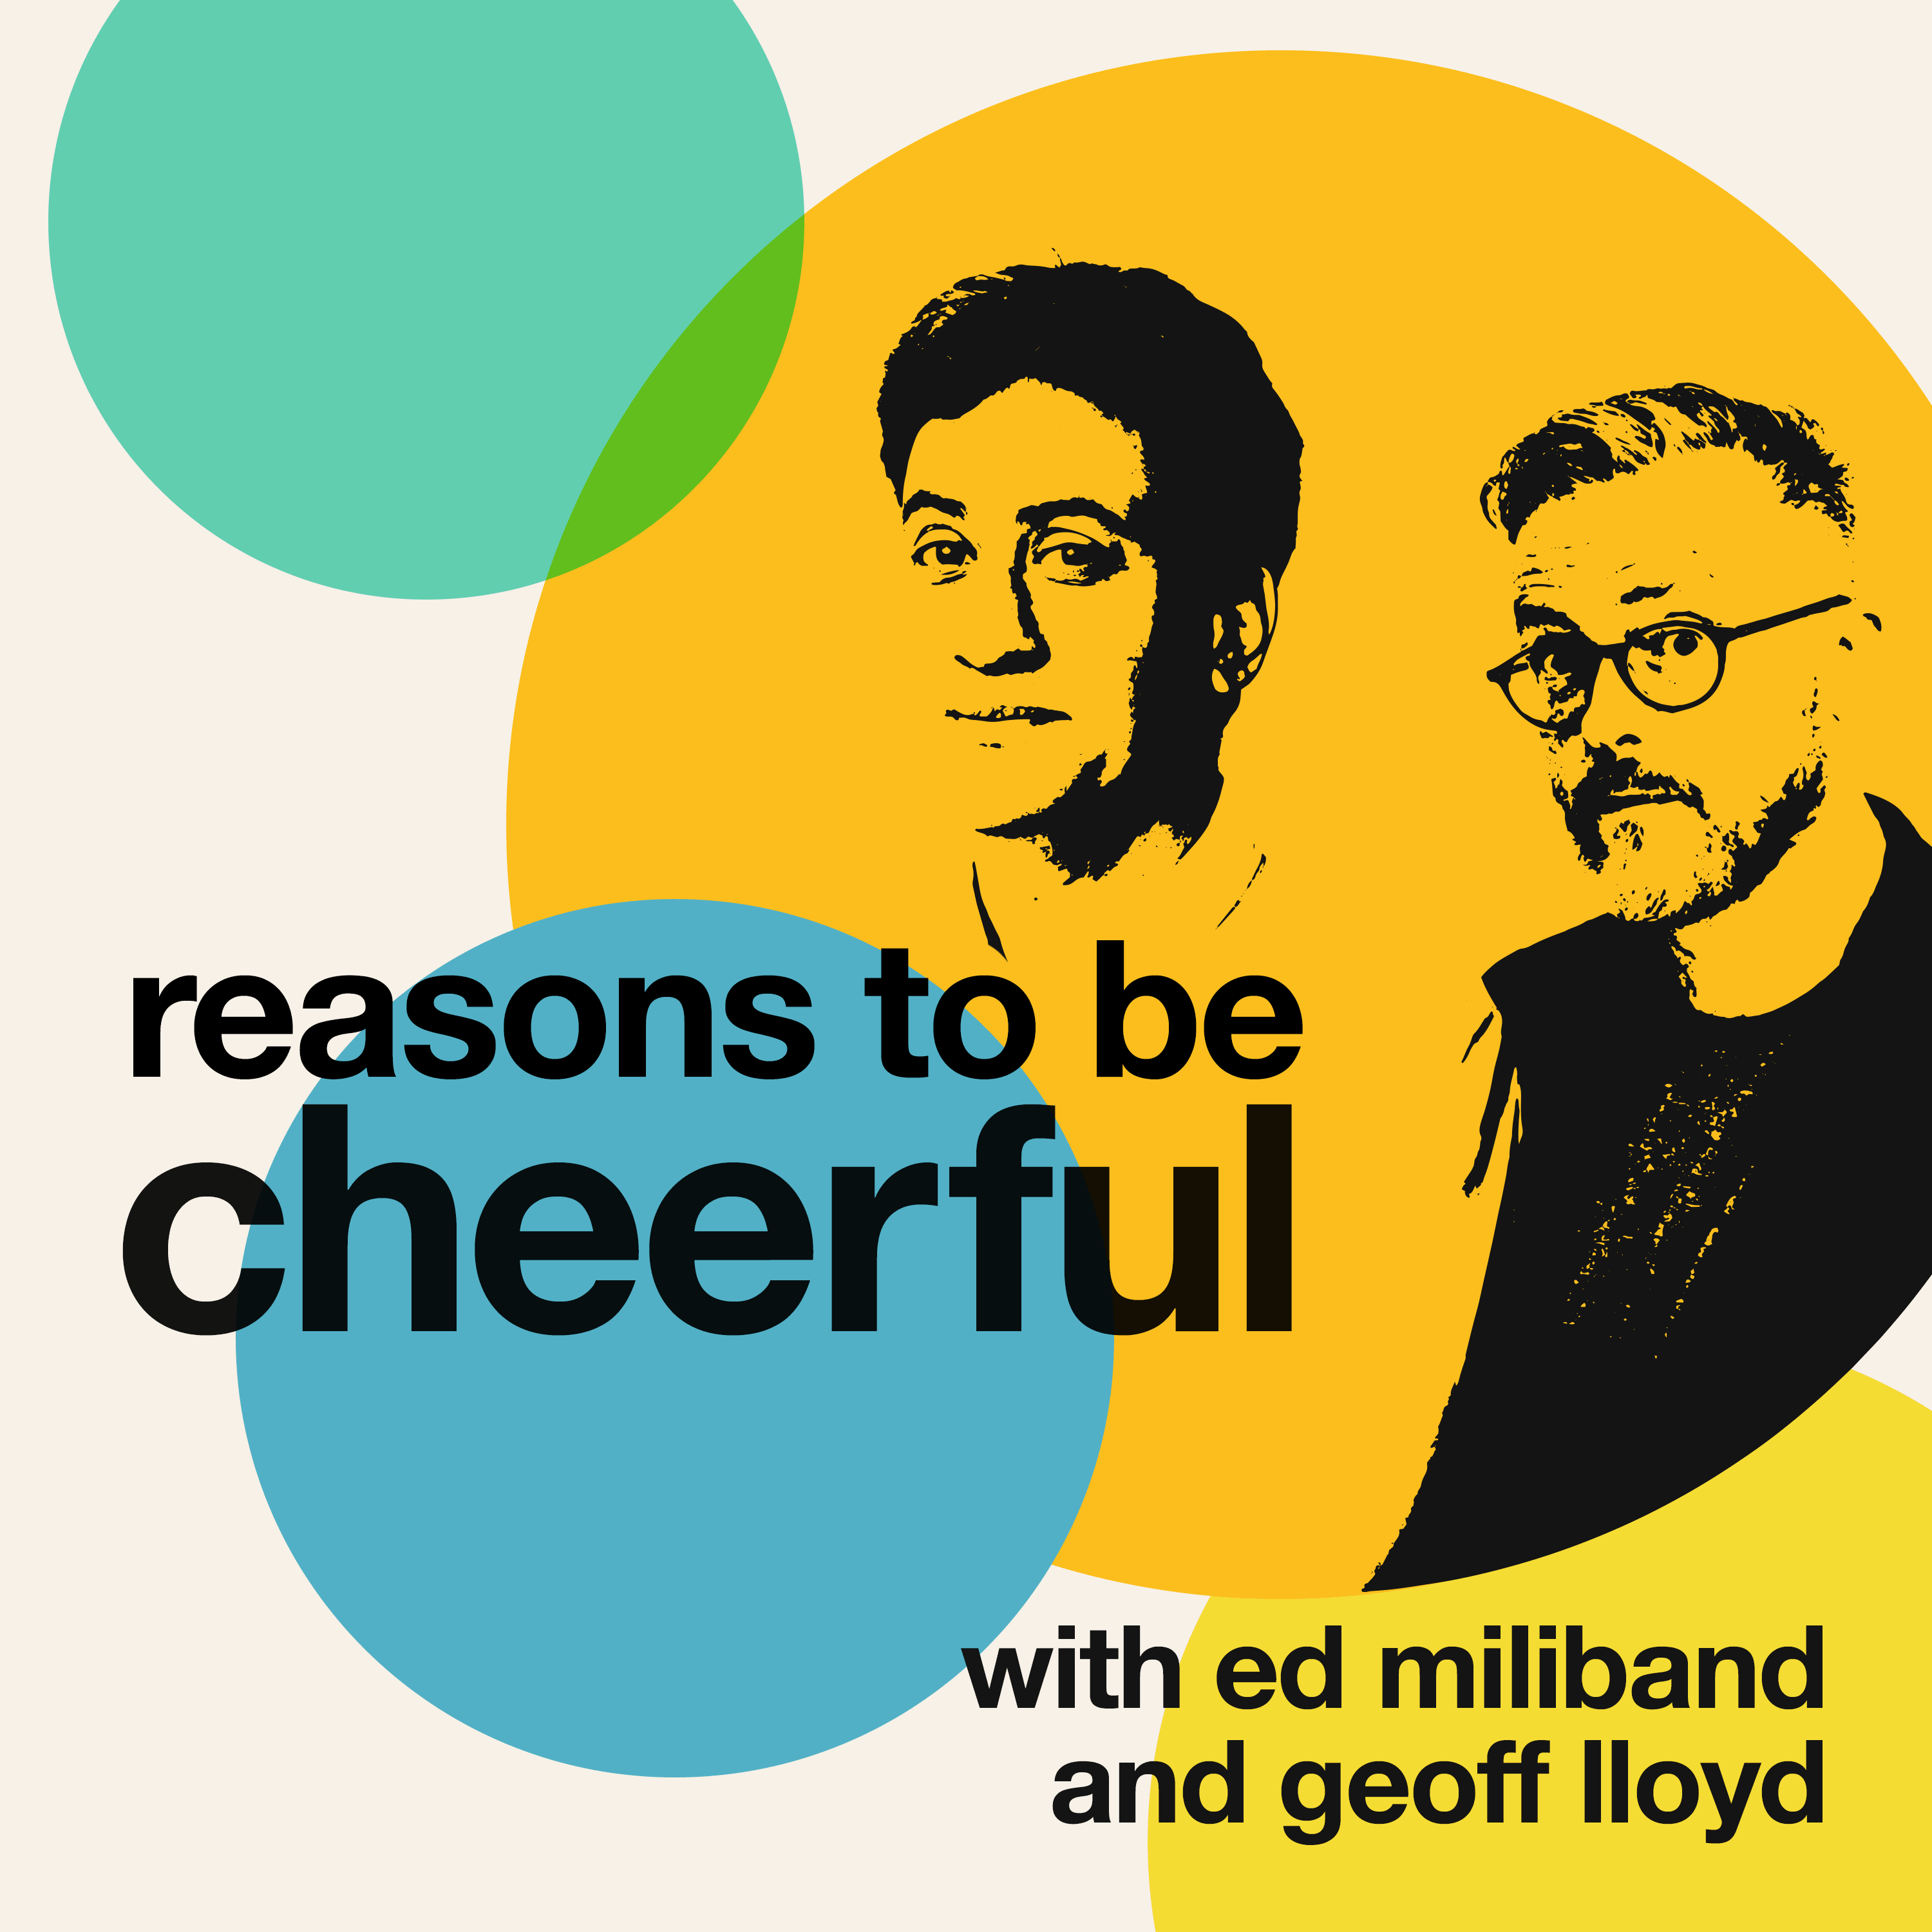 67. THE OFFICIAL REASONS TO BE CHEERFUL 2018 CHART SHOW